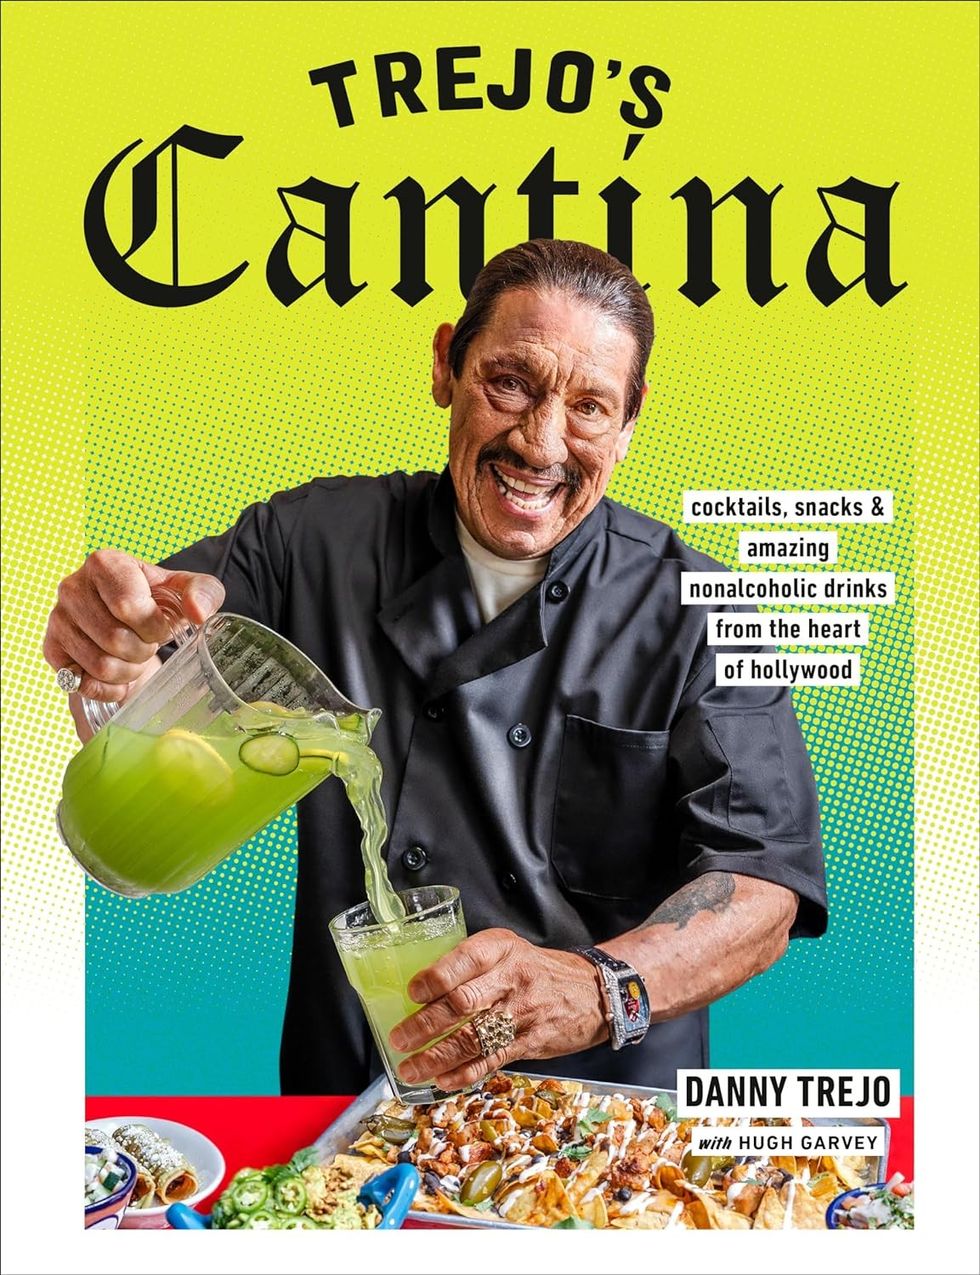 Trejo's Cantina: Cocktails, Snacks, and Amazing Nonalcoholic Drinks from the Heart of Hollywood by Danny Trejo with Hugh Garvey